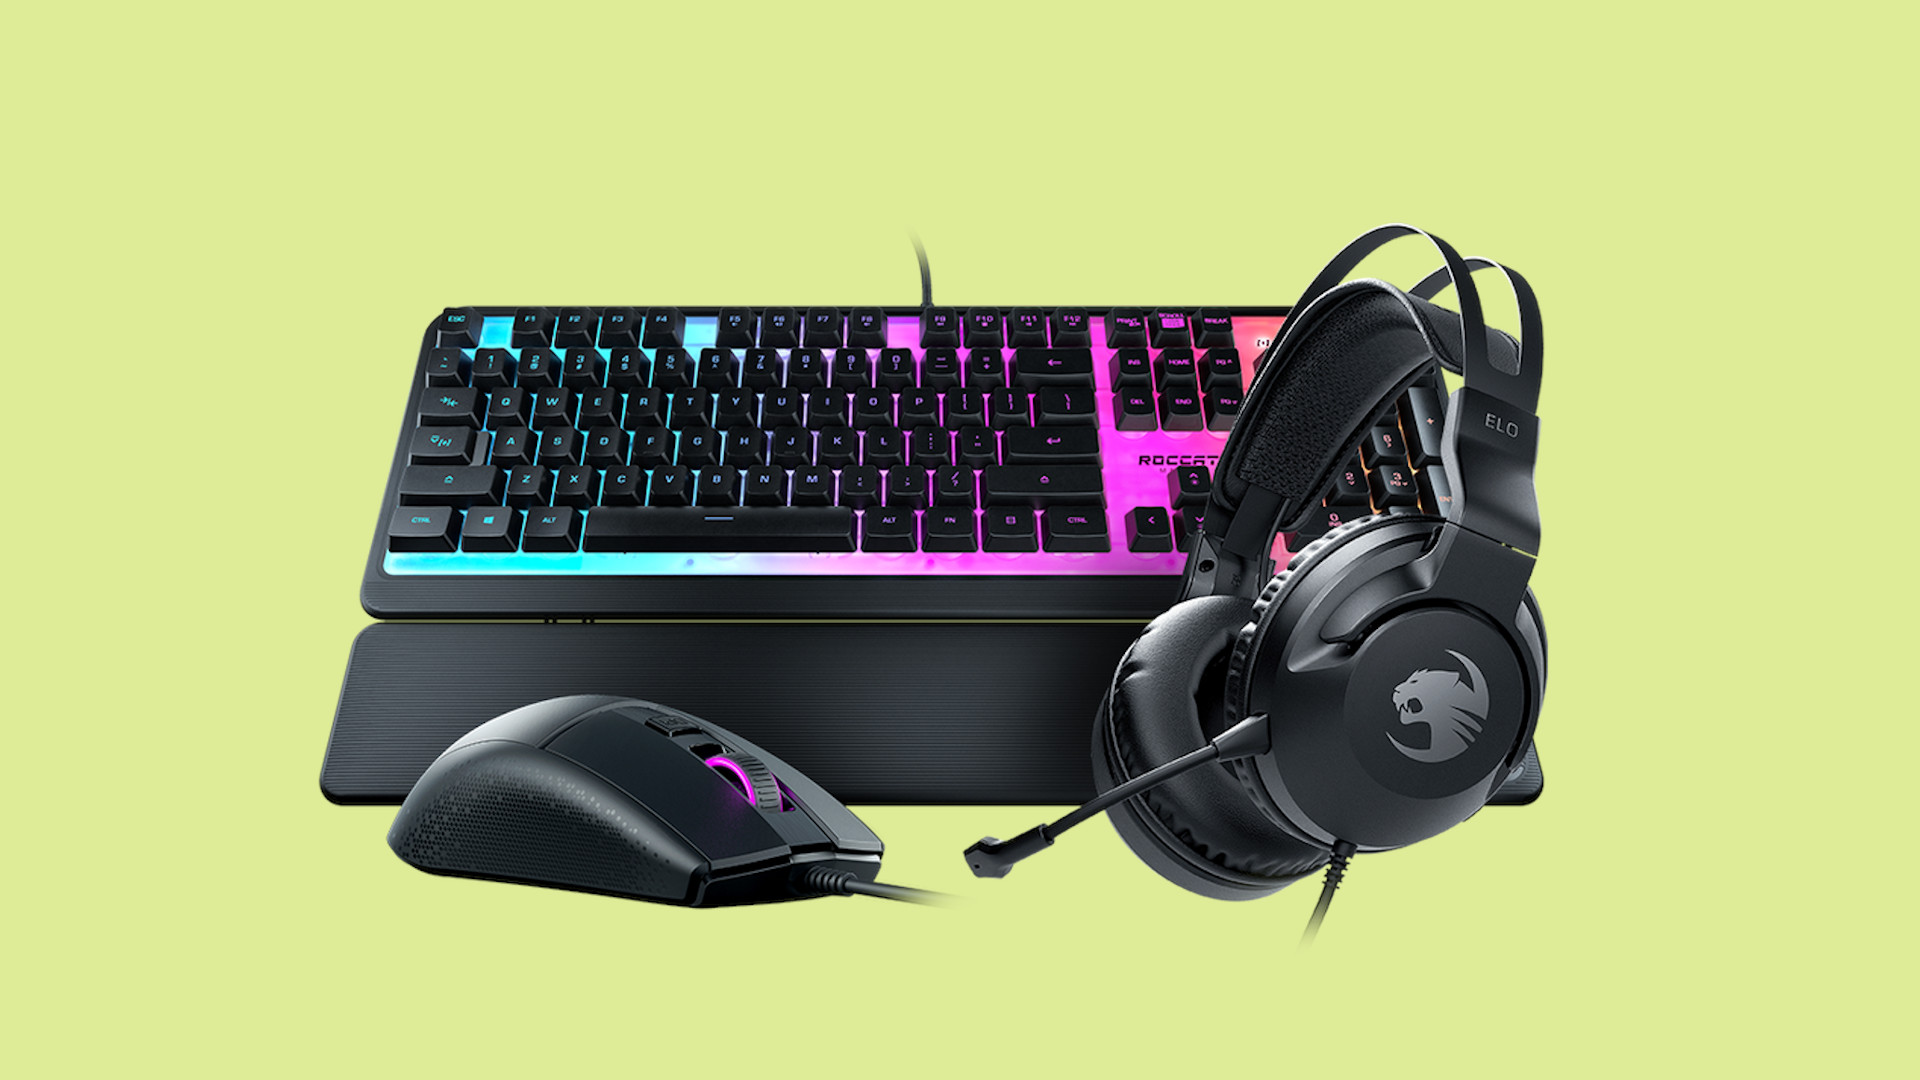 PS5 keyboard and mouse: A Roccat bundle with a keyboard, mouse, headset, and mouse mat